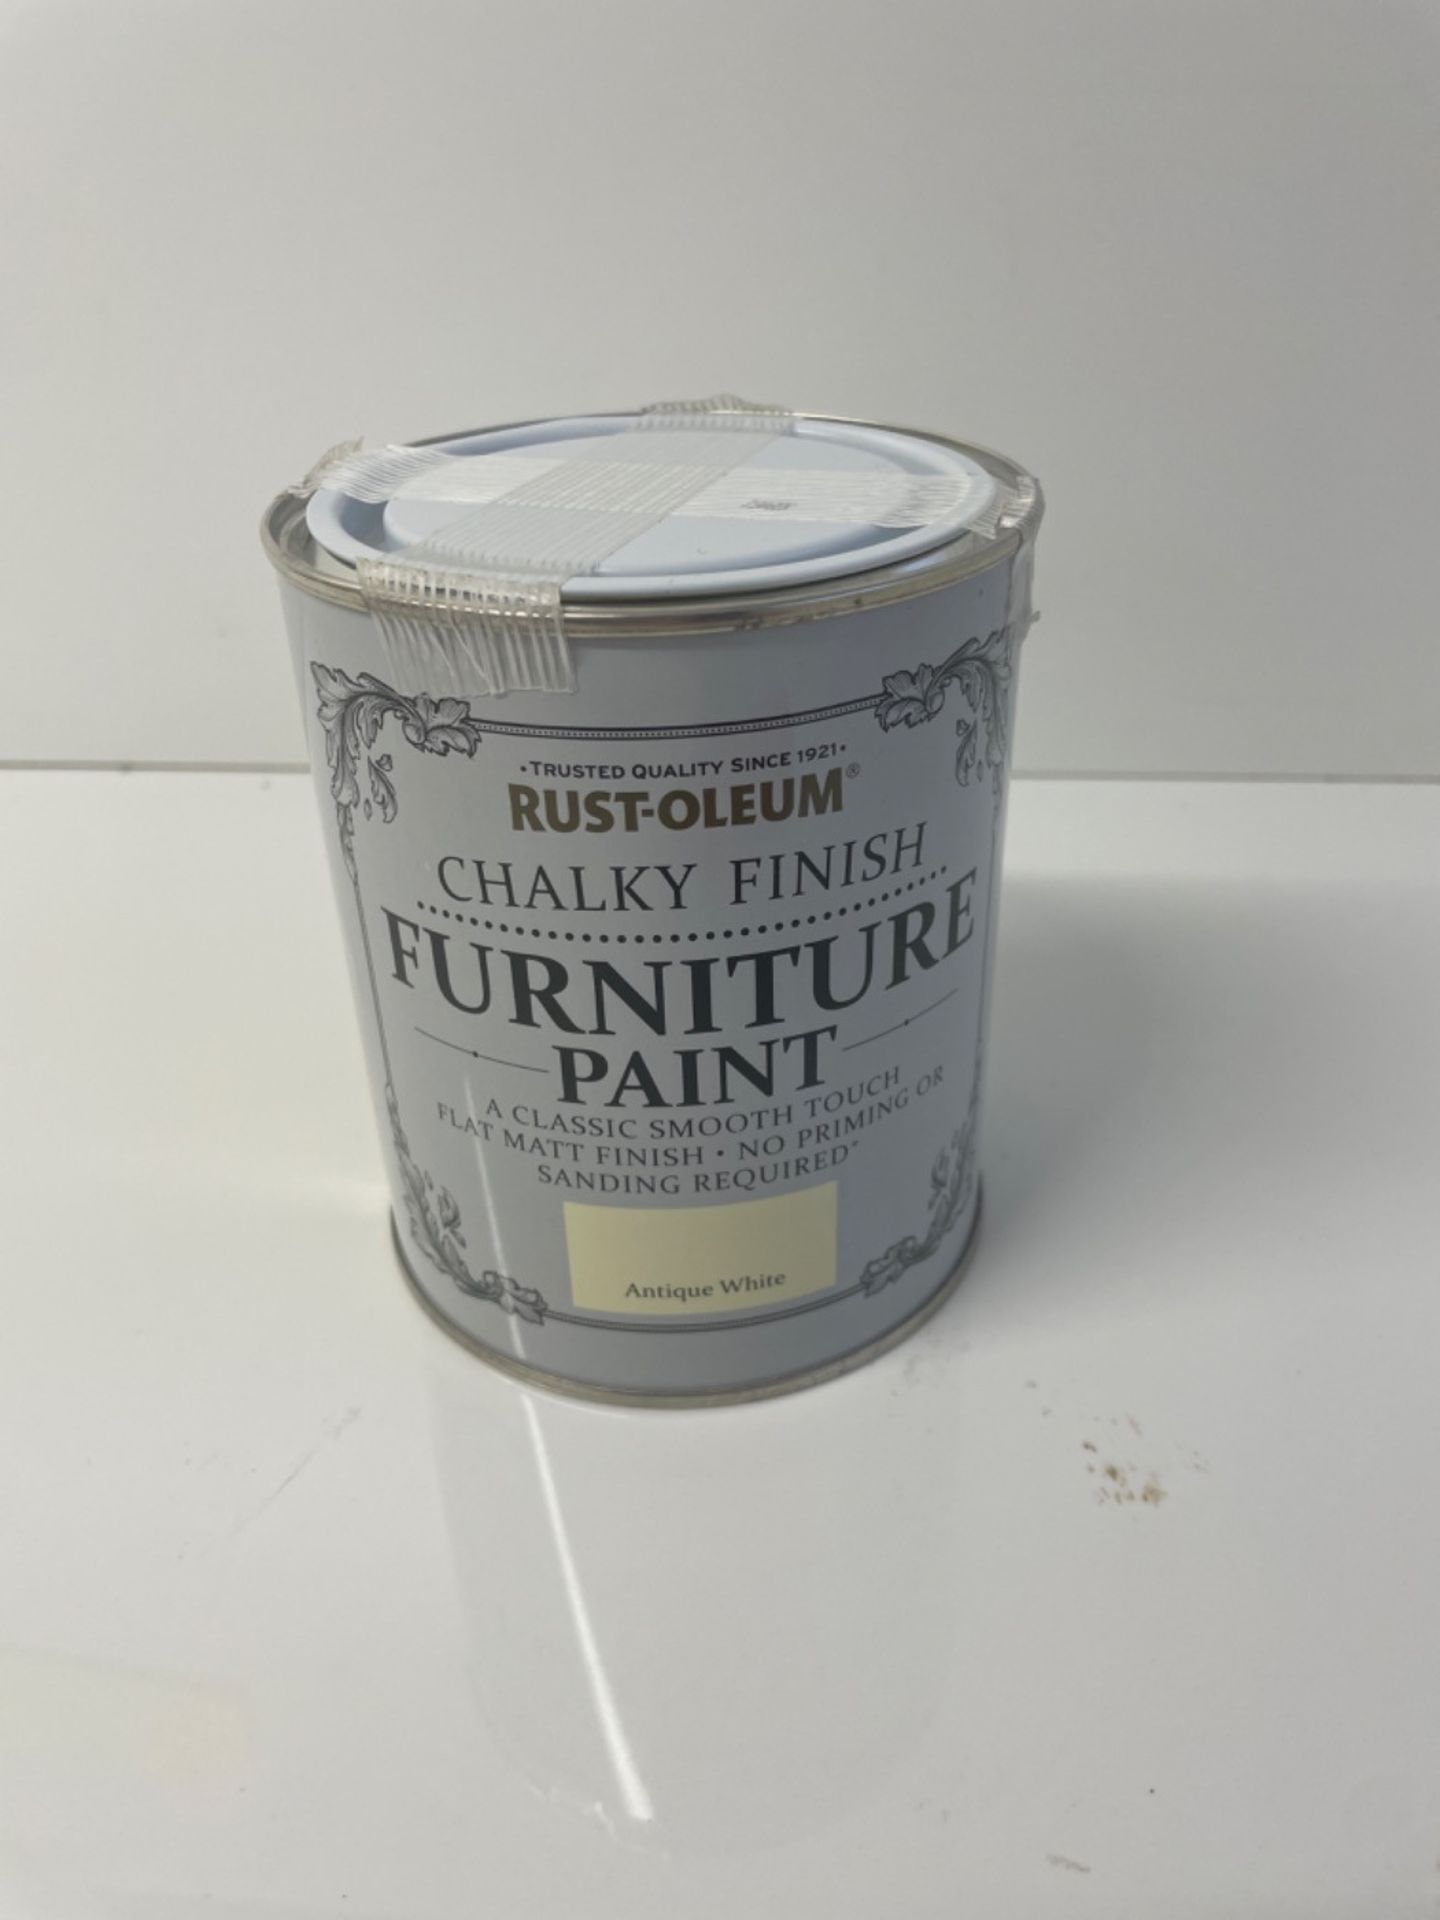 Rust-Oleum AMZ0012 Chalky Finish Furniture Paint - Antique White - 750ml - Image 3 of 3